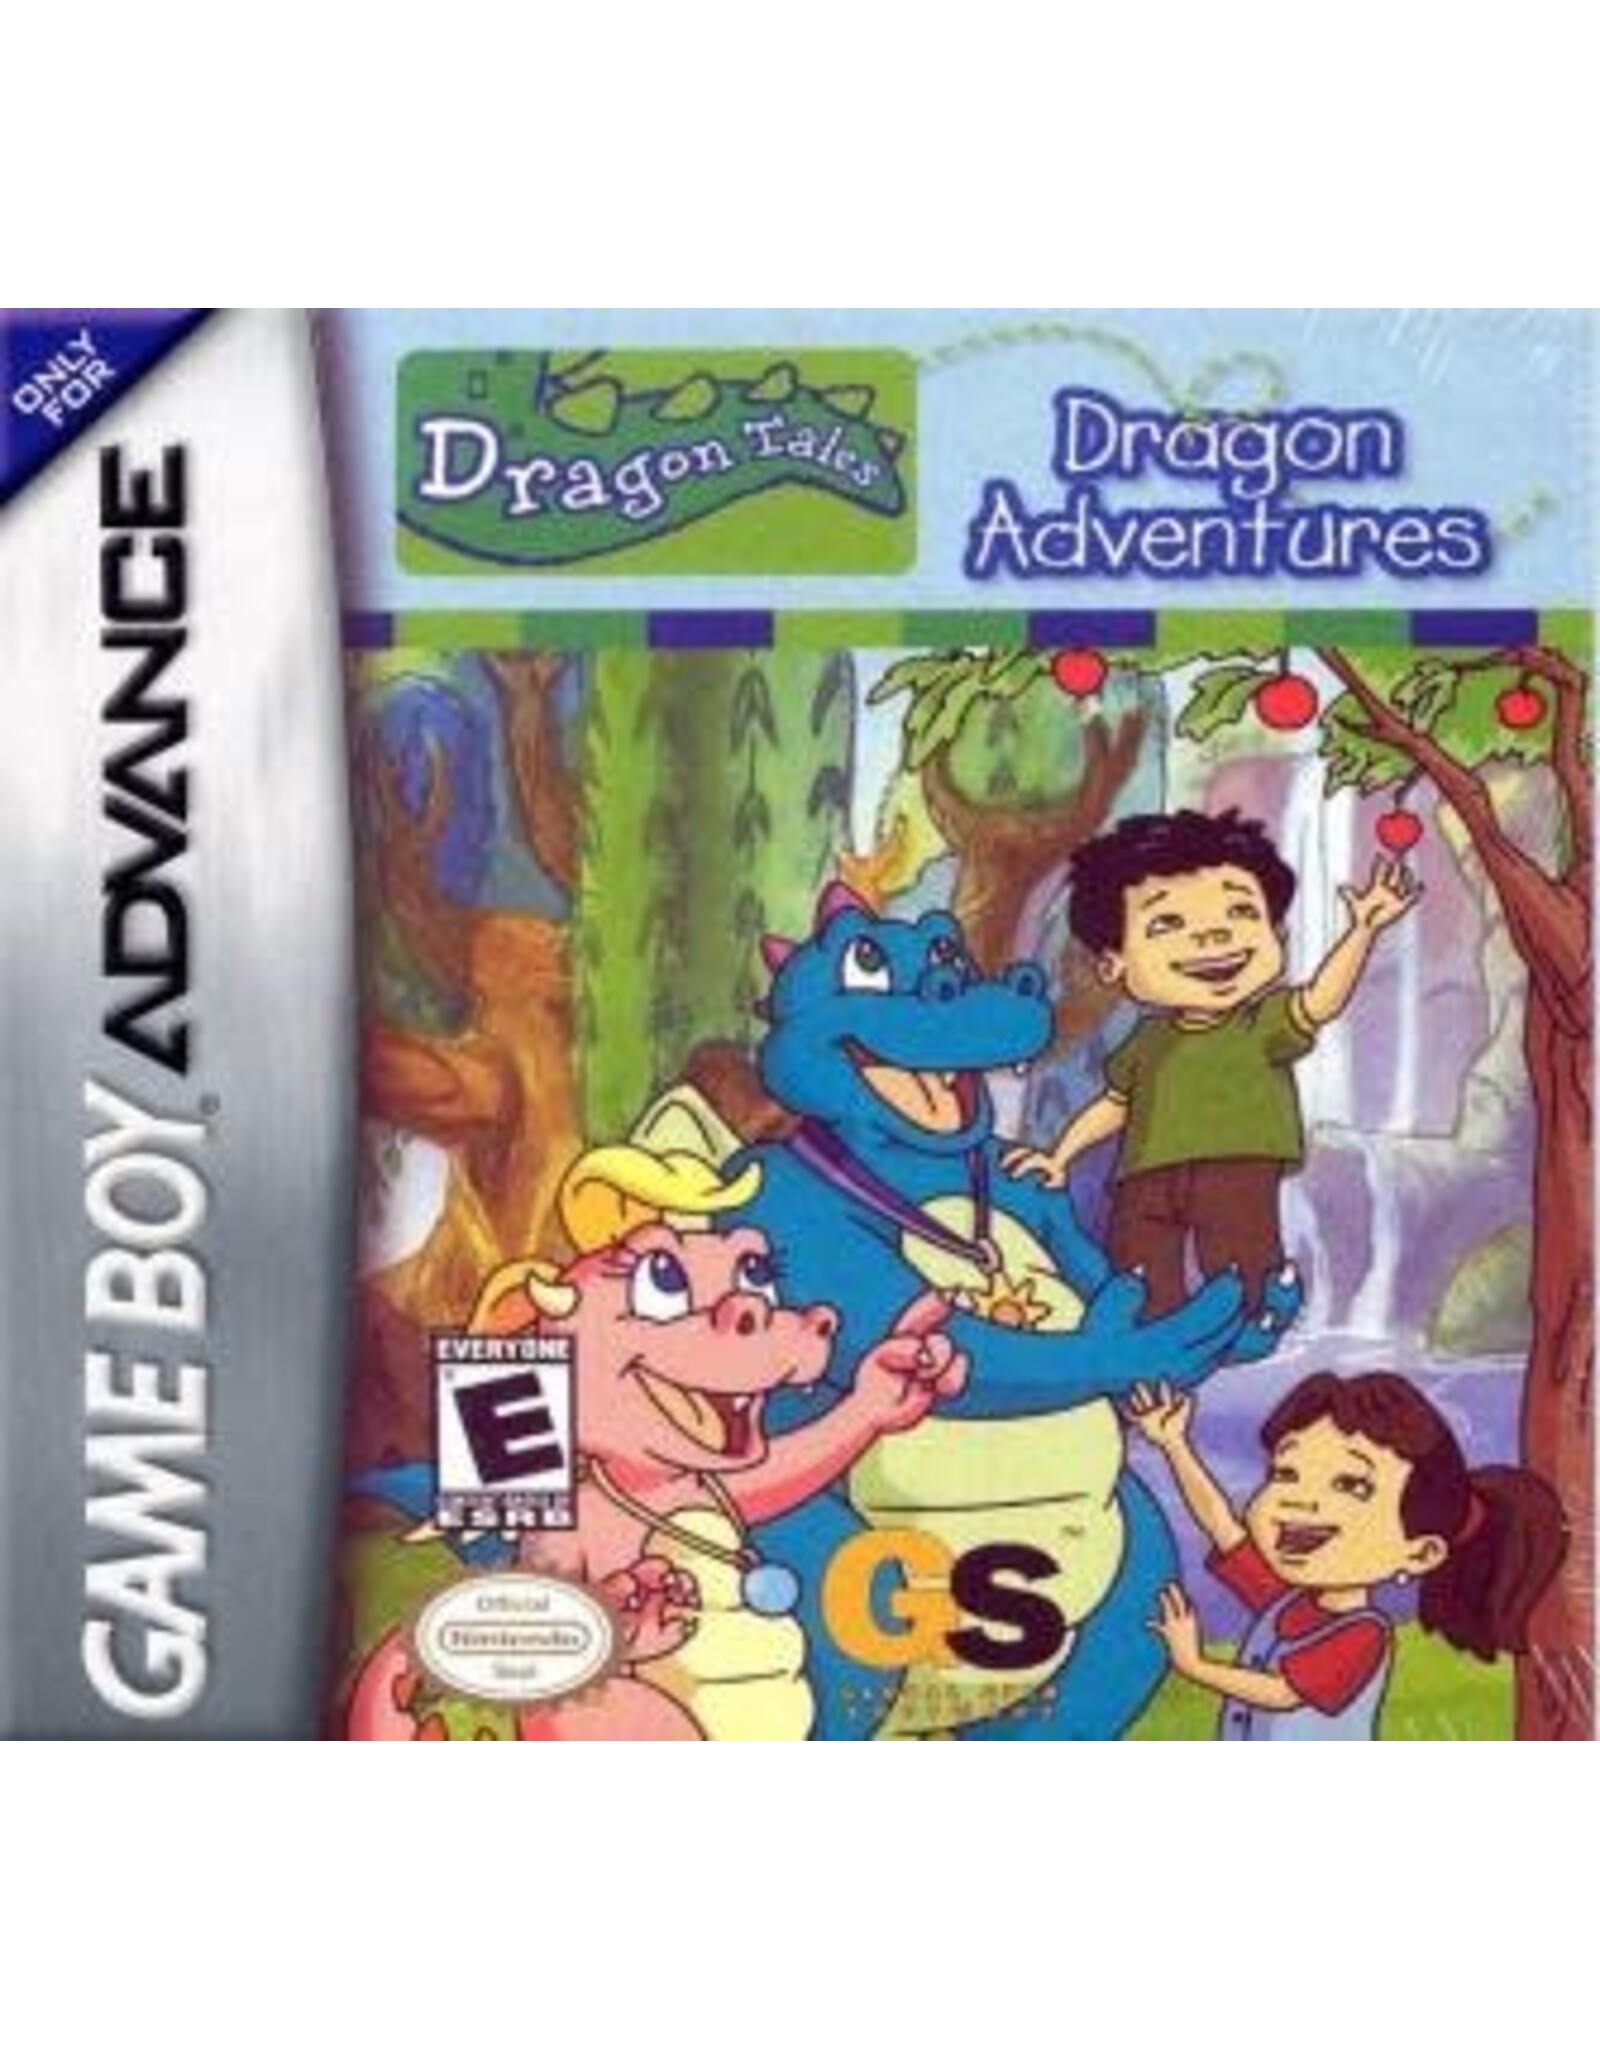 Game Boy Advance Dragon Tales Dragon Adventures (Cart Only)